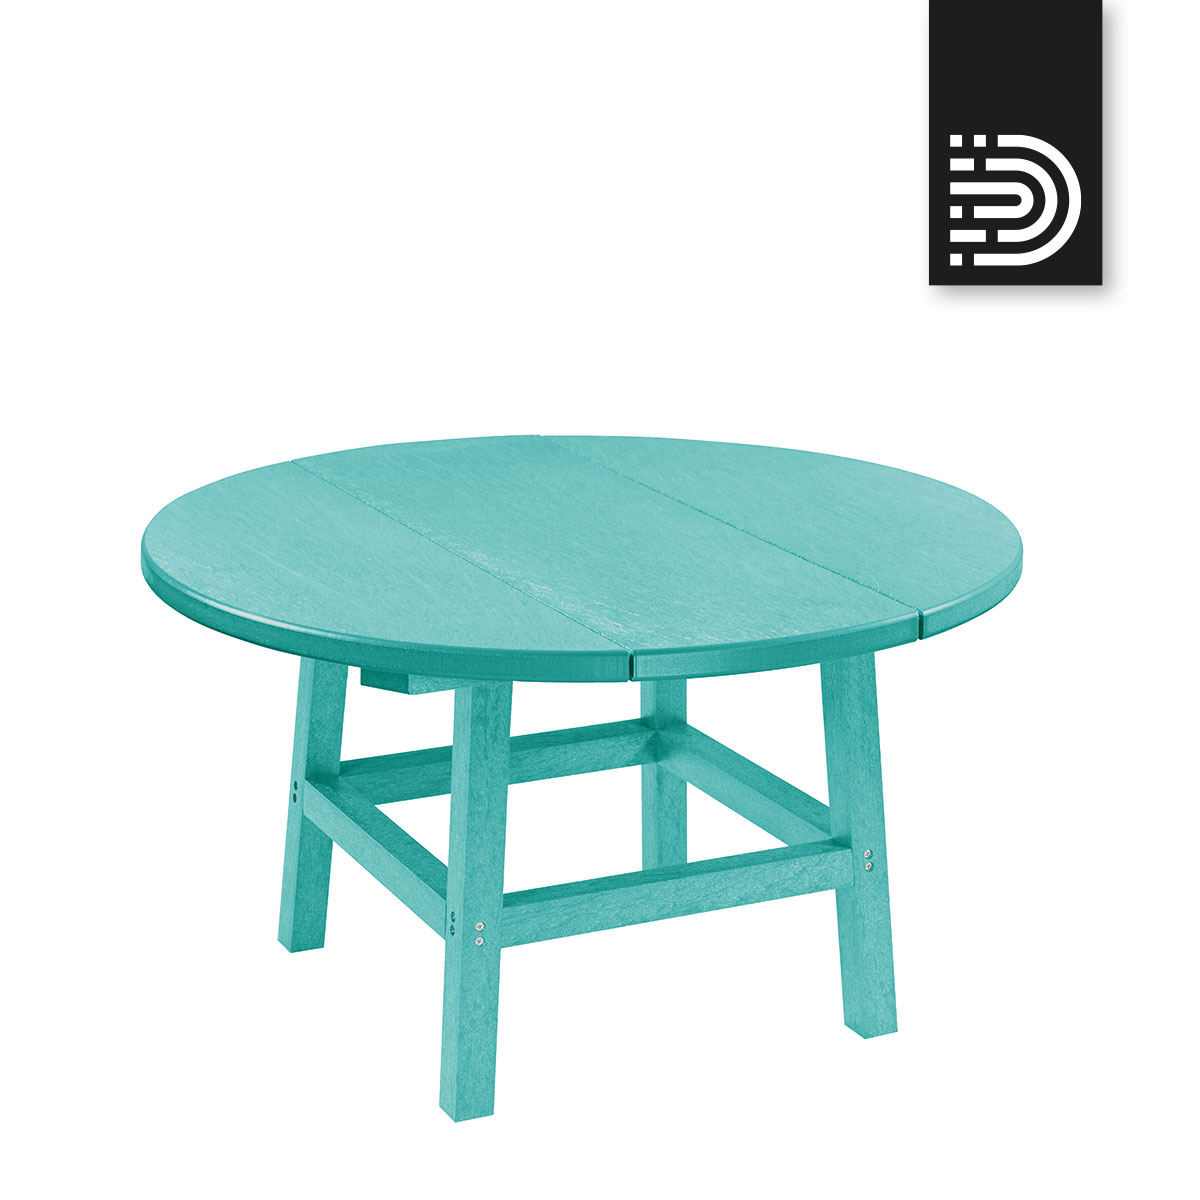 Cocktail Table in Turquoise 09- TB01+TT03/02